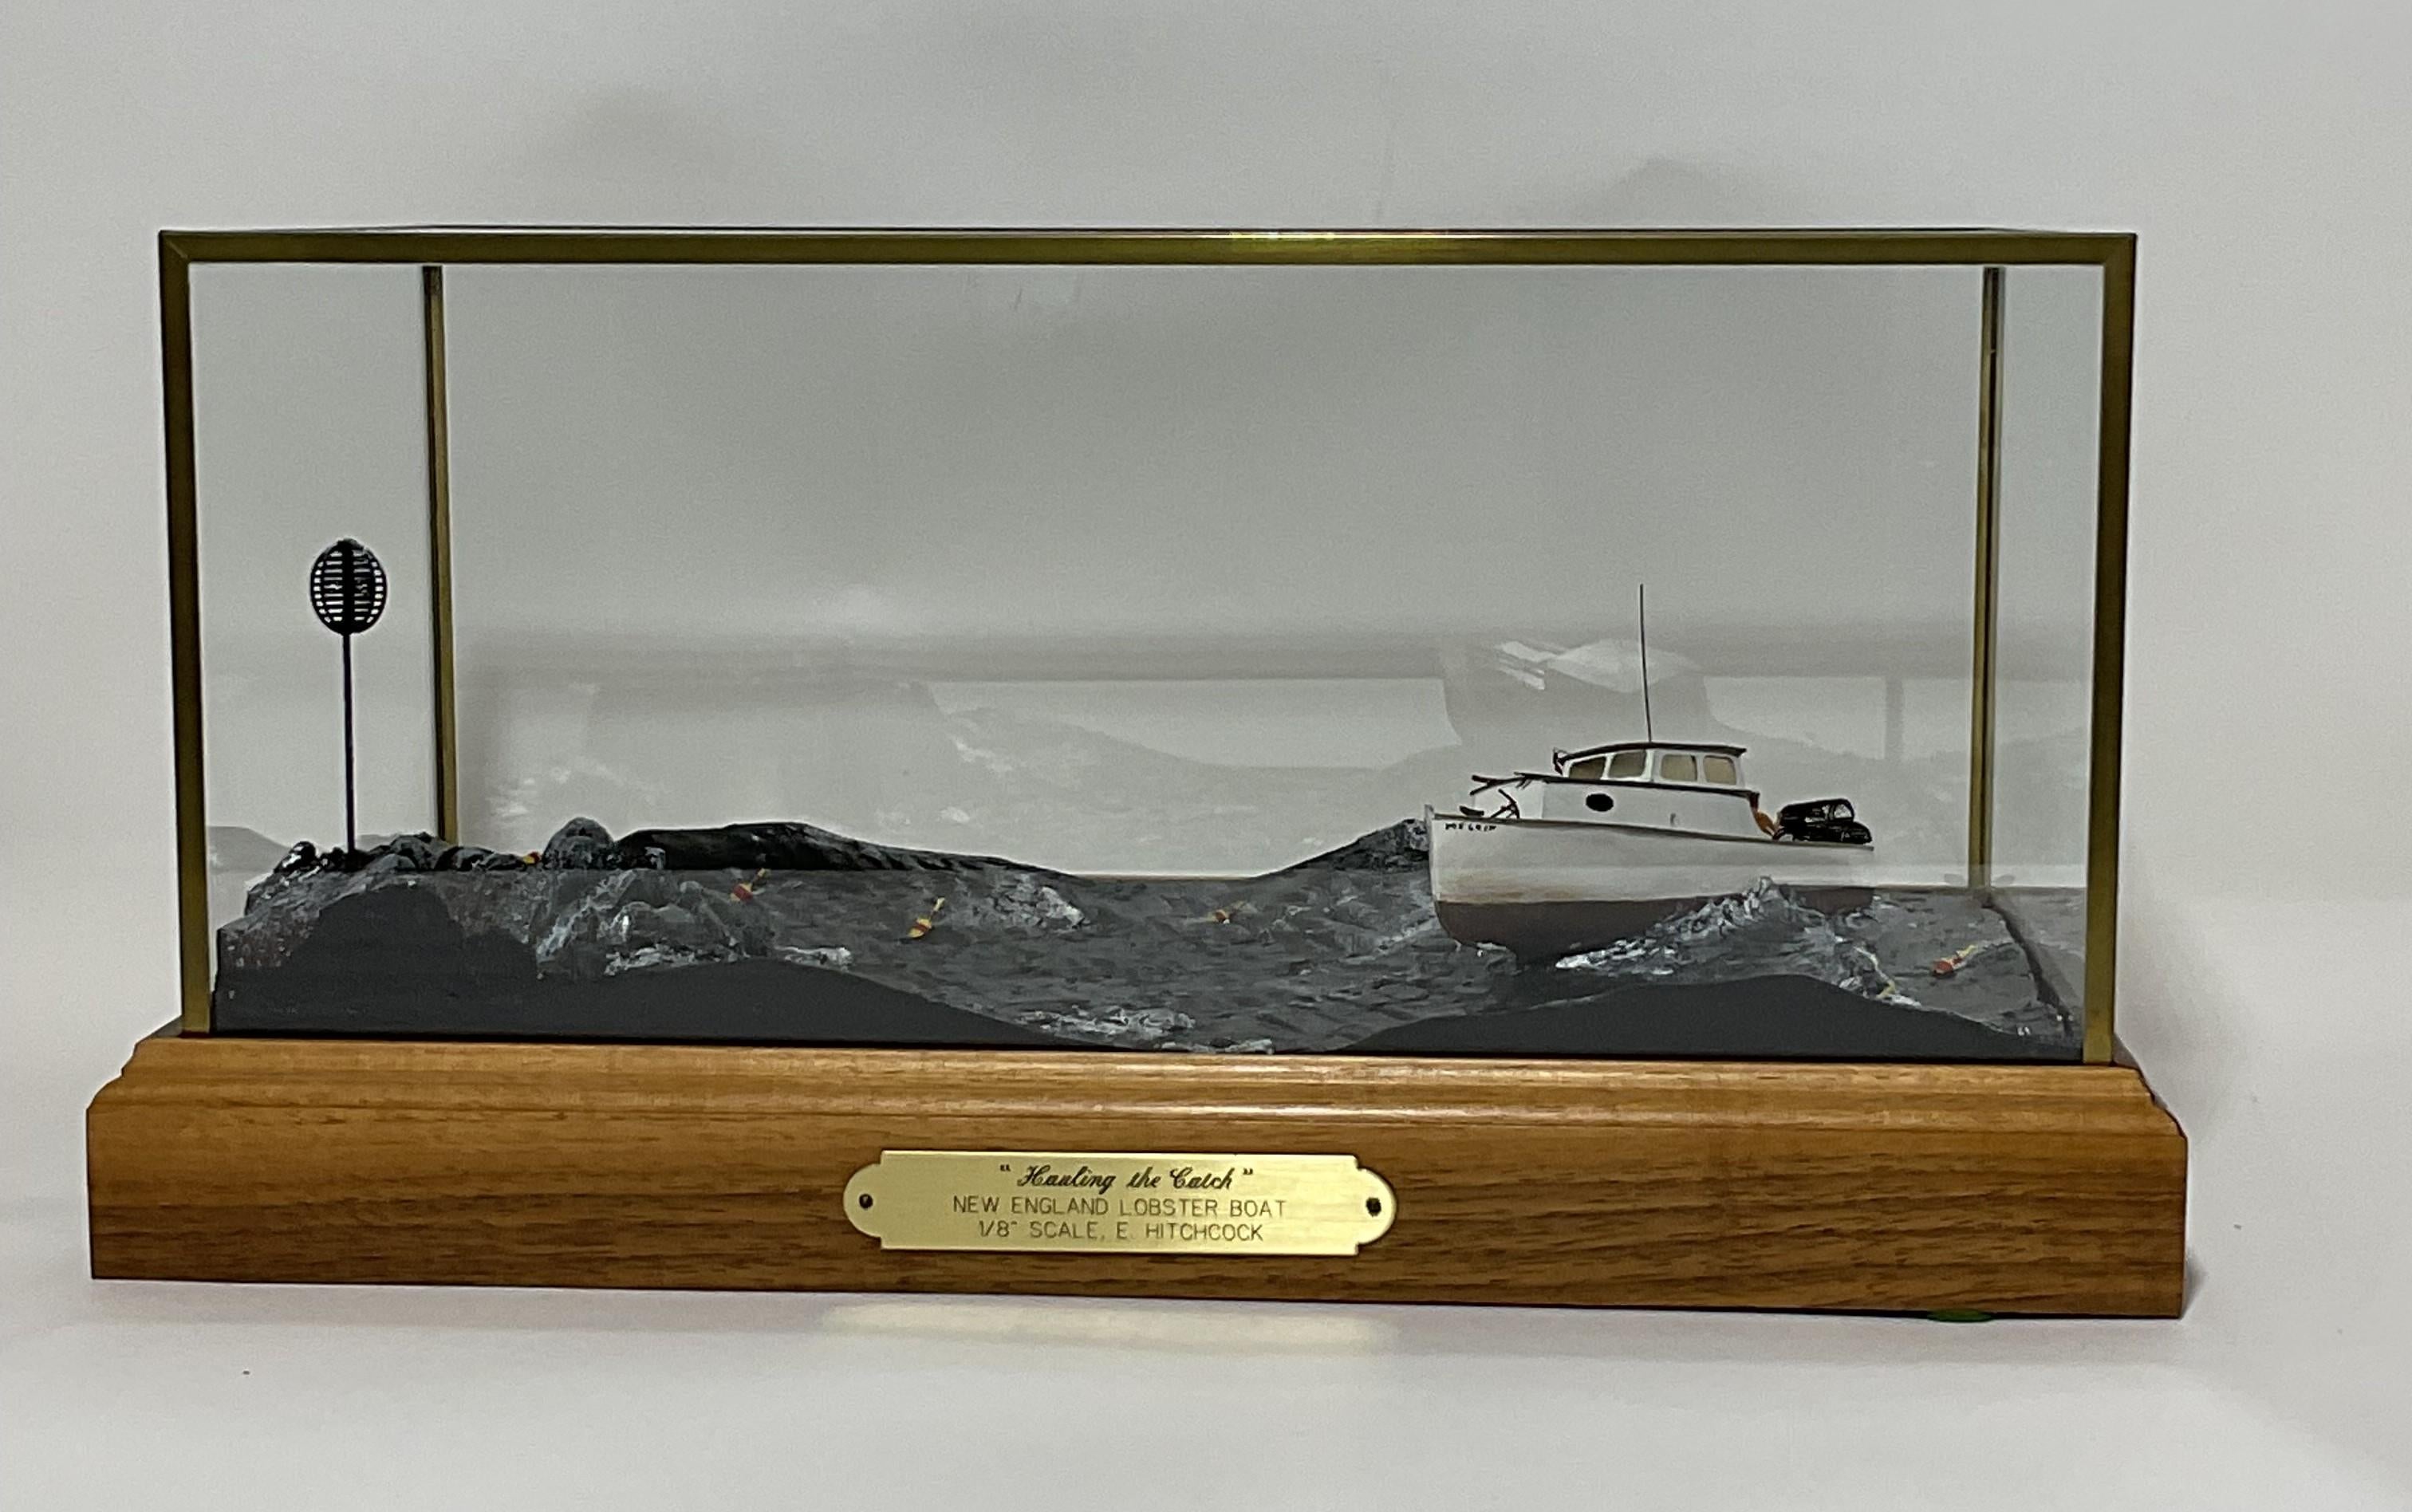 North American Lobster Boat Diorama Titled 